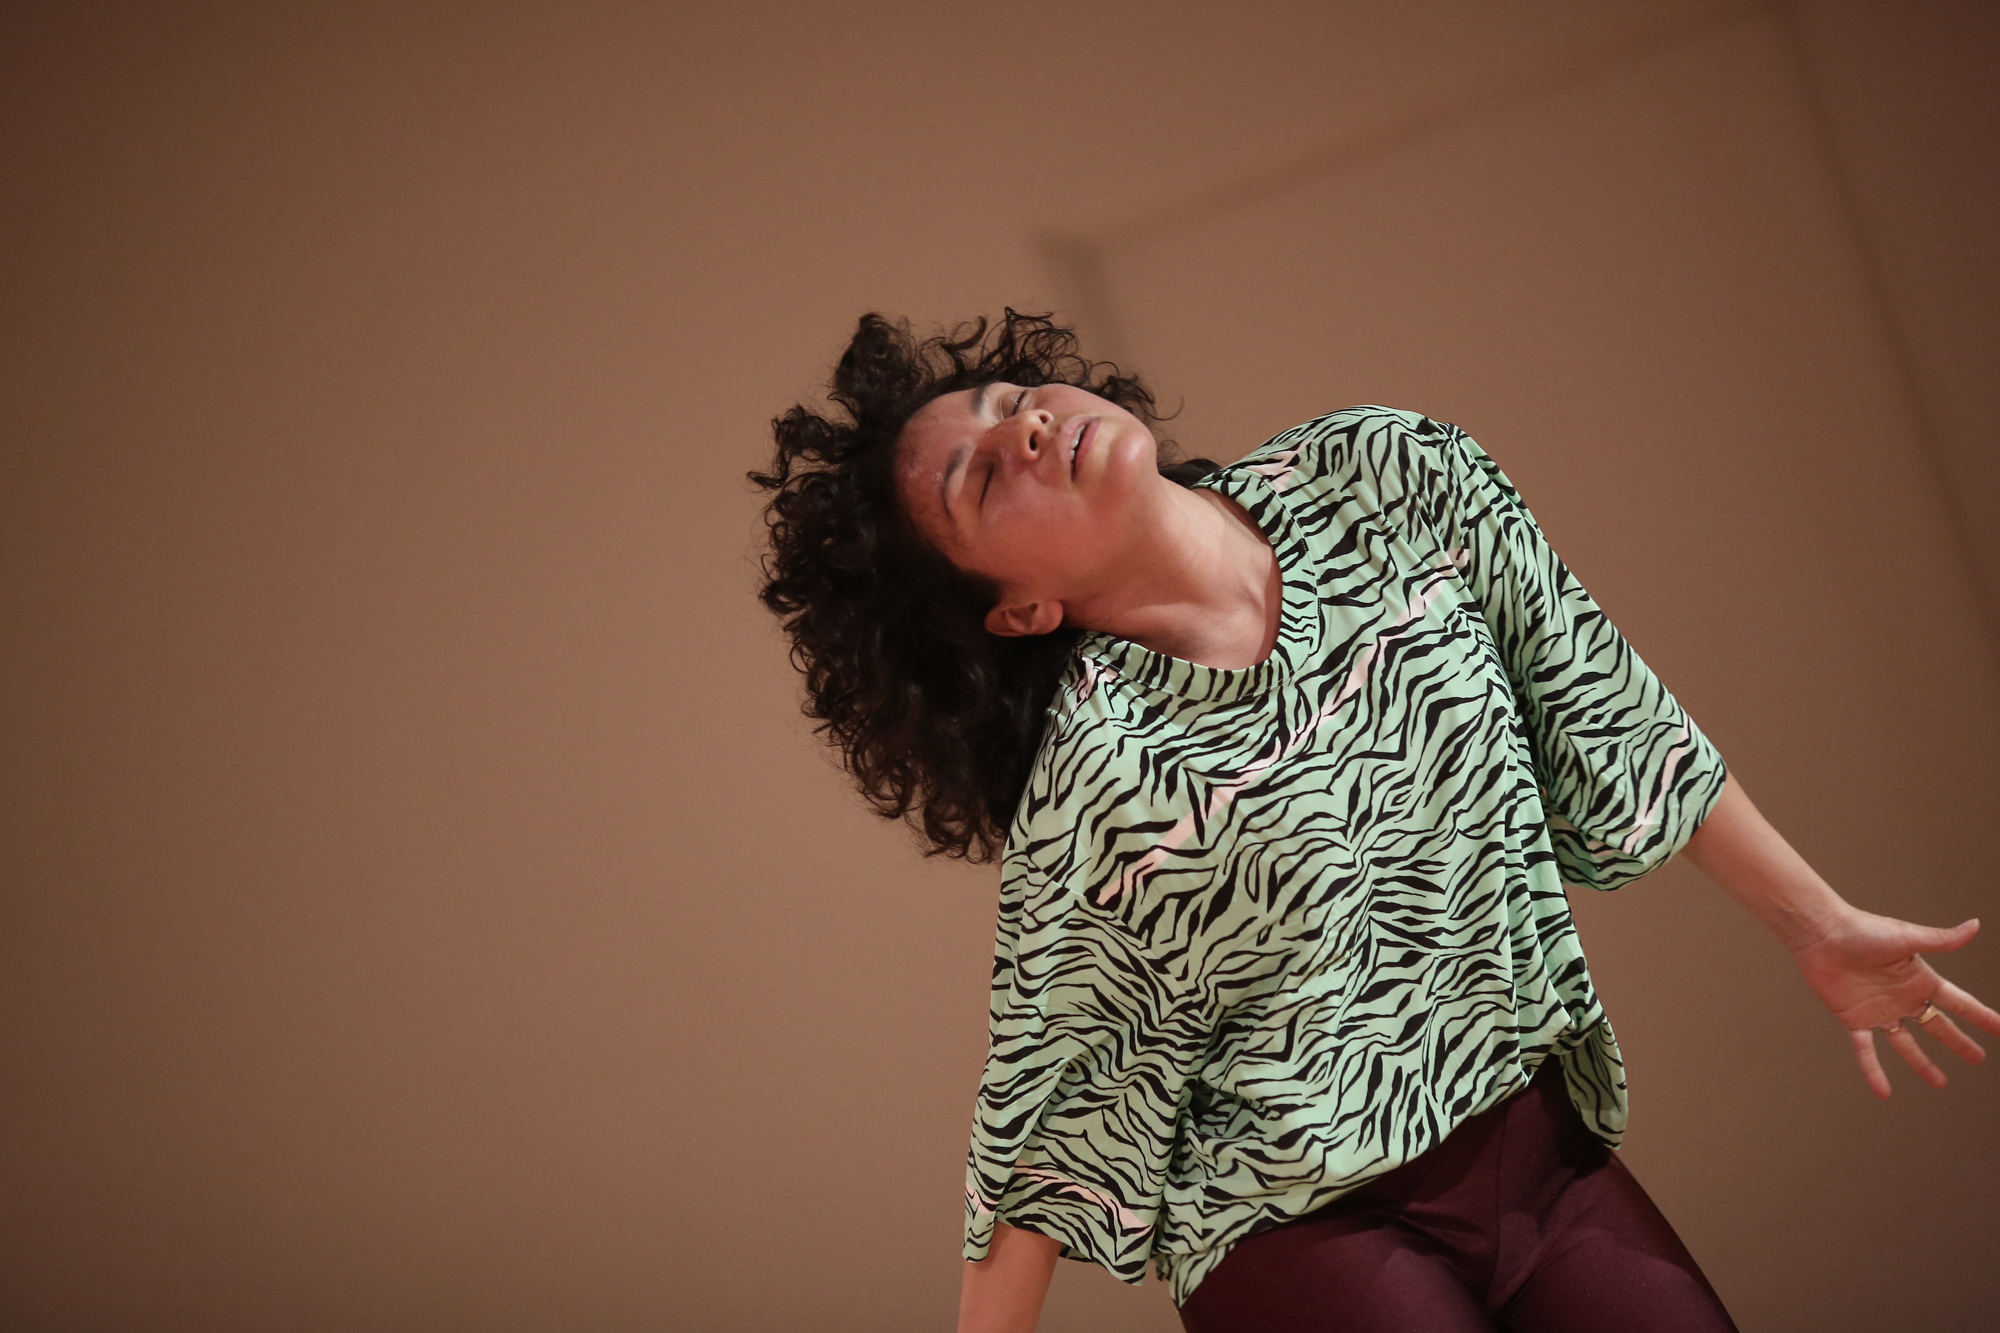 A Latinx woman with black curly hair and tan skin dances in a mint green and black tiger print t-shirt and maroon leggings. The floor is blonde wood, the walls are off-white her feet are bare.